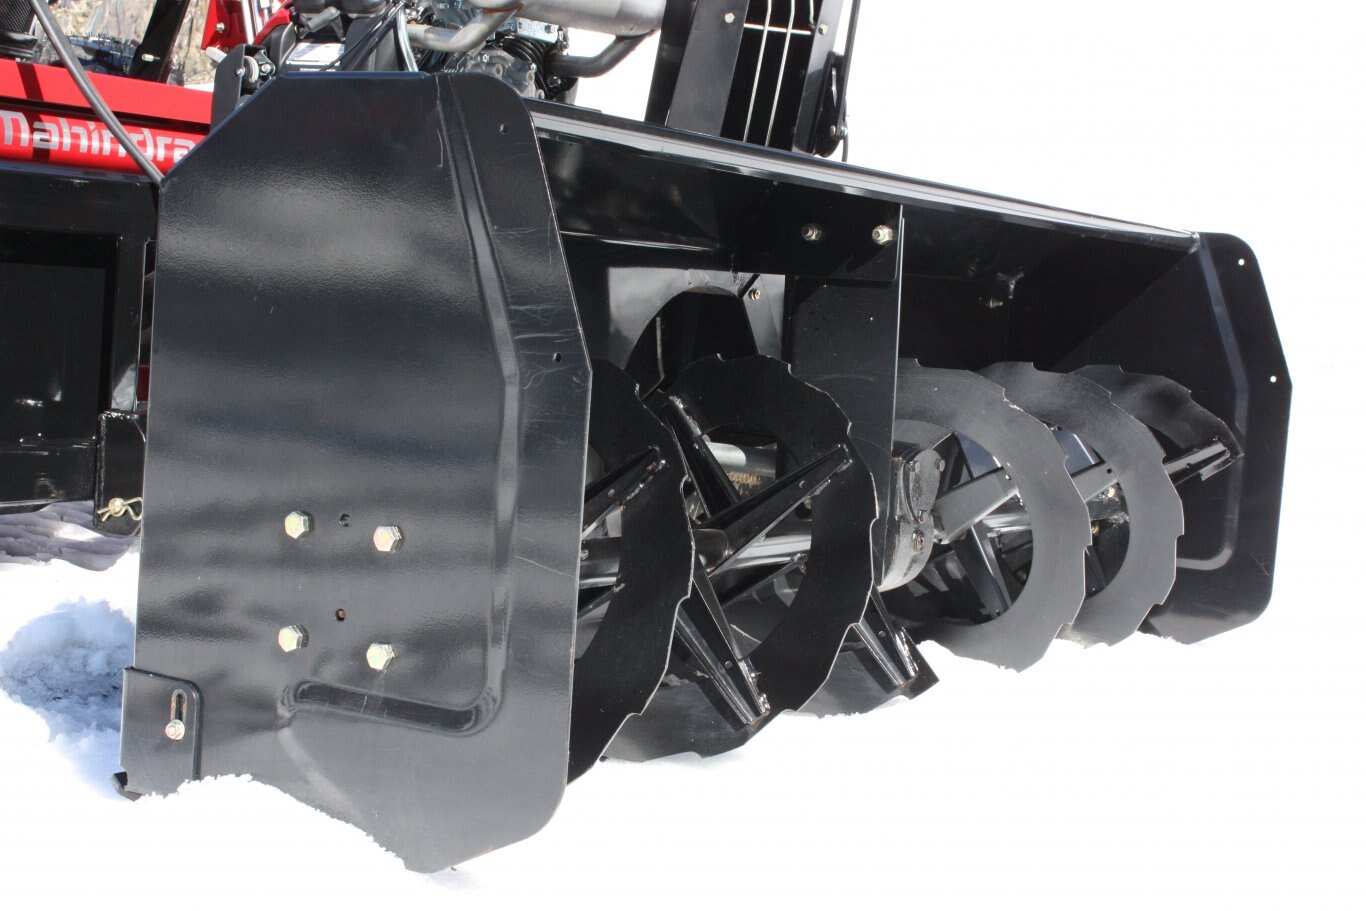 Bercomac 54 Premium Snowblower for tractors equipped with Skid Steer style attach